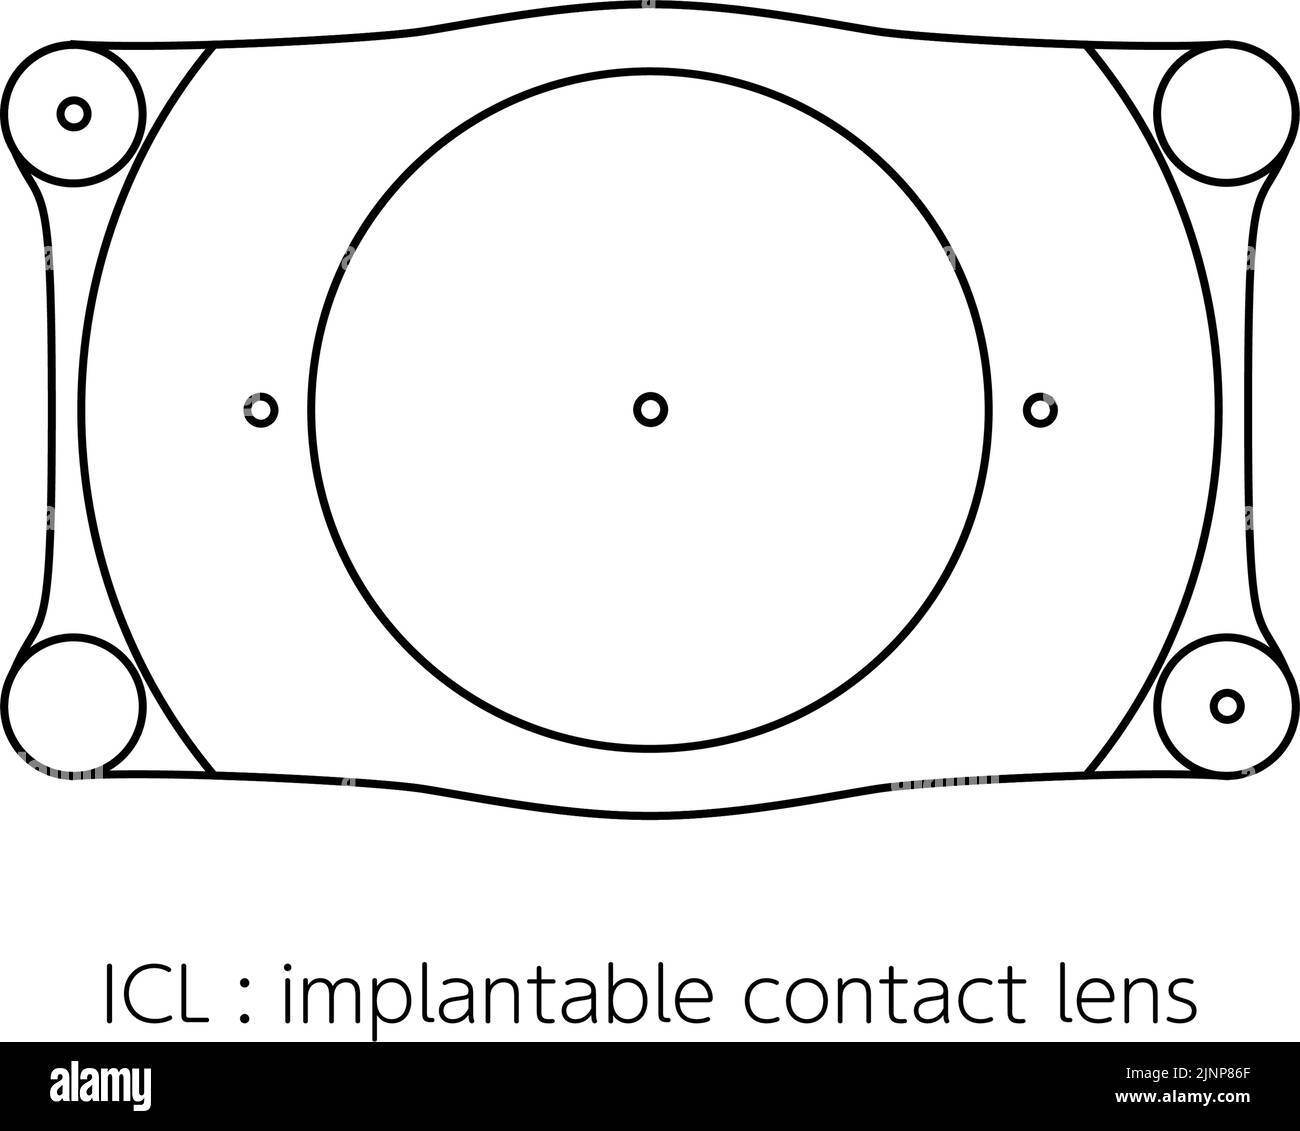 ICL, intraocular contact lens illustration Stock Vector